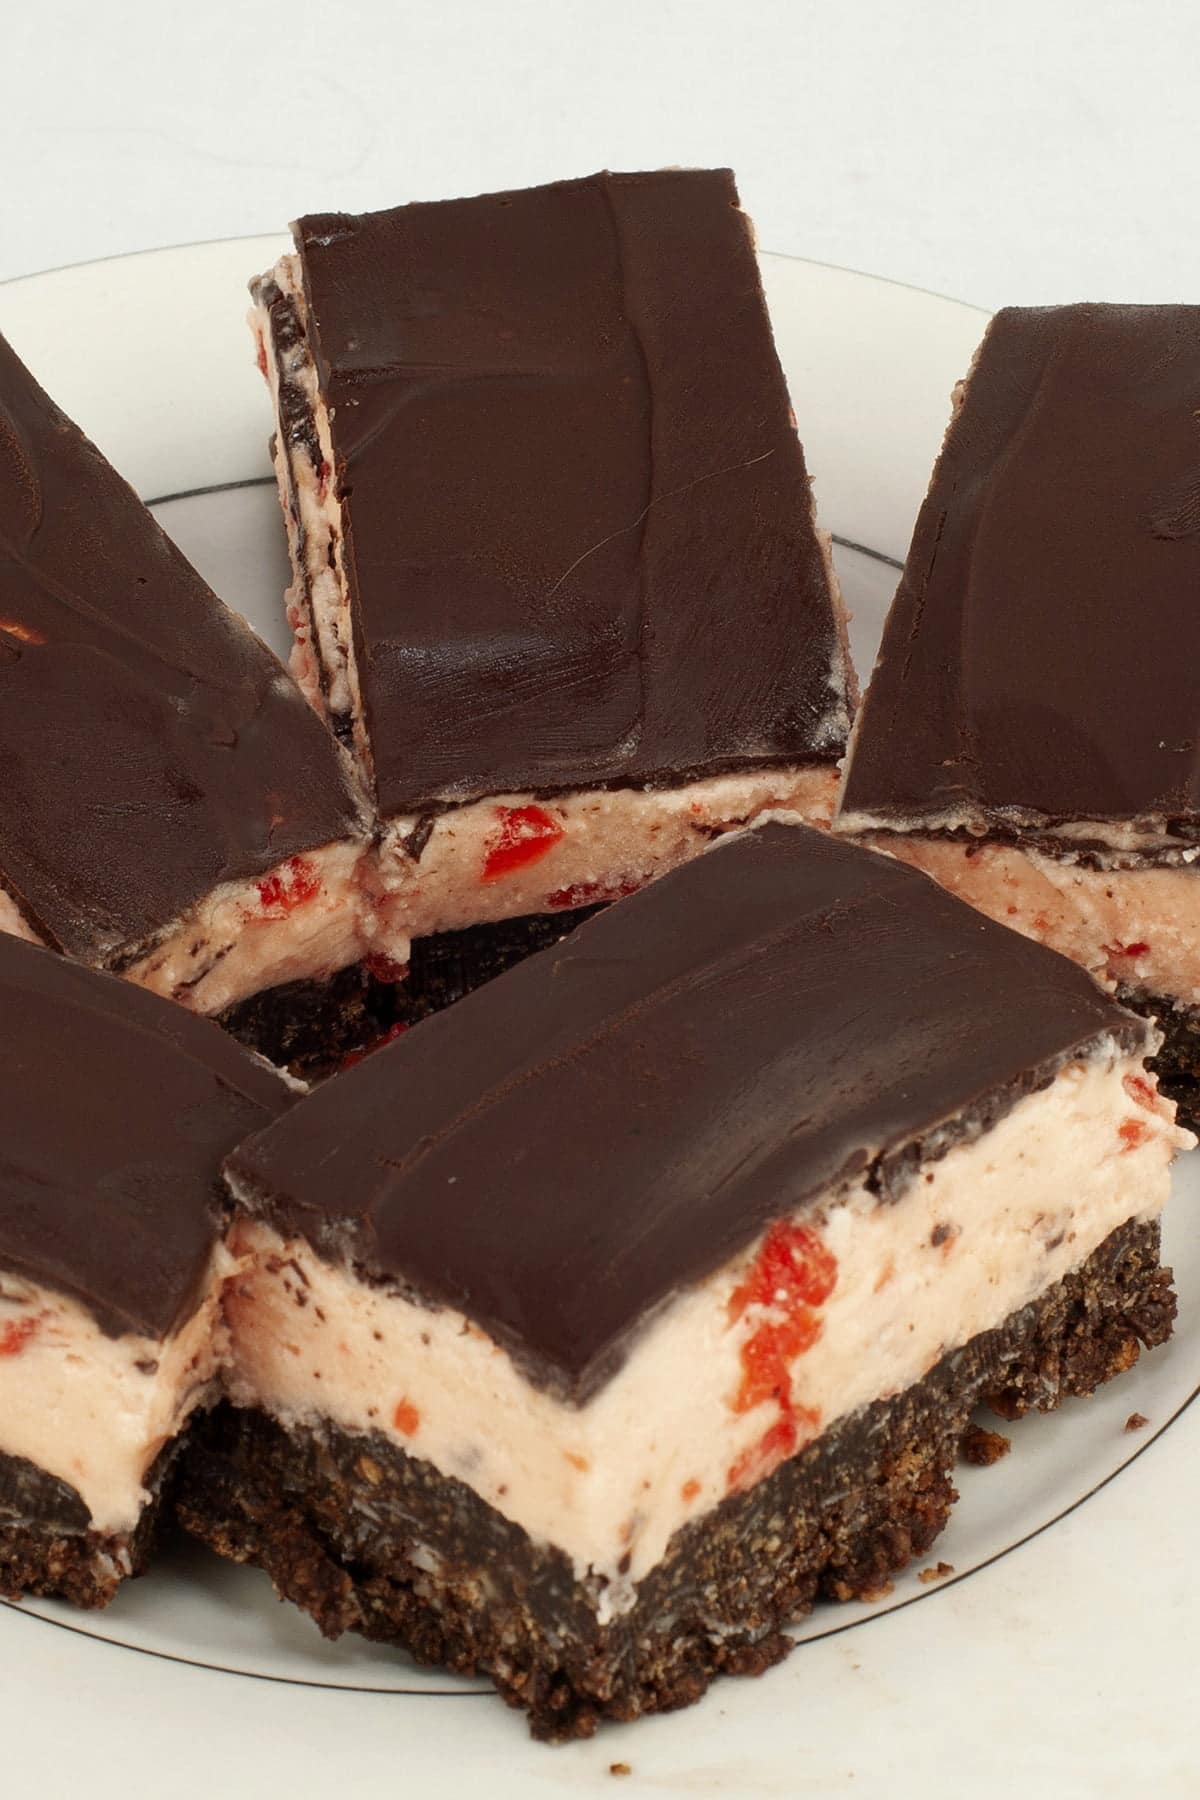 Close up view of a plate of 3 layered bars. The bottom layer looks like a brownie, the middle is a thick pink buttercream with bits of cherry visible, and the top is a smooth chocolate ganache. Maraschino Cherry Nanaimo Bars!